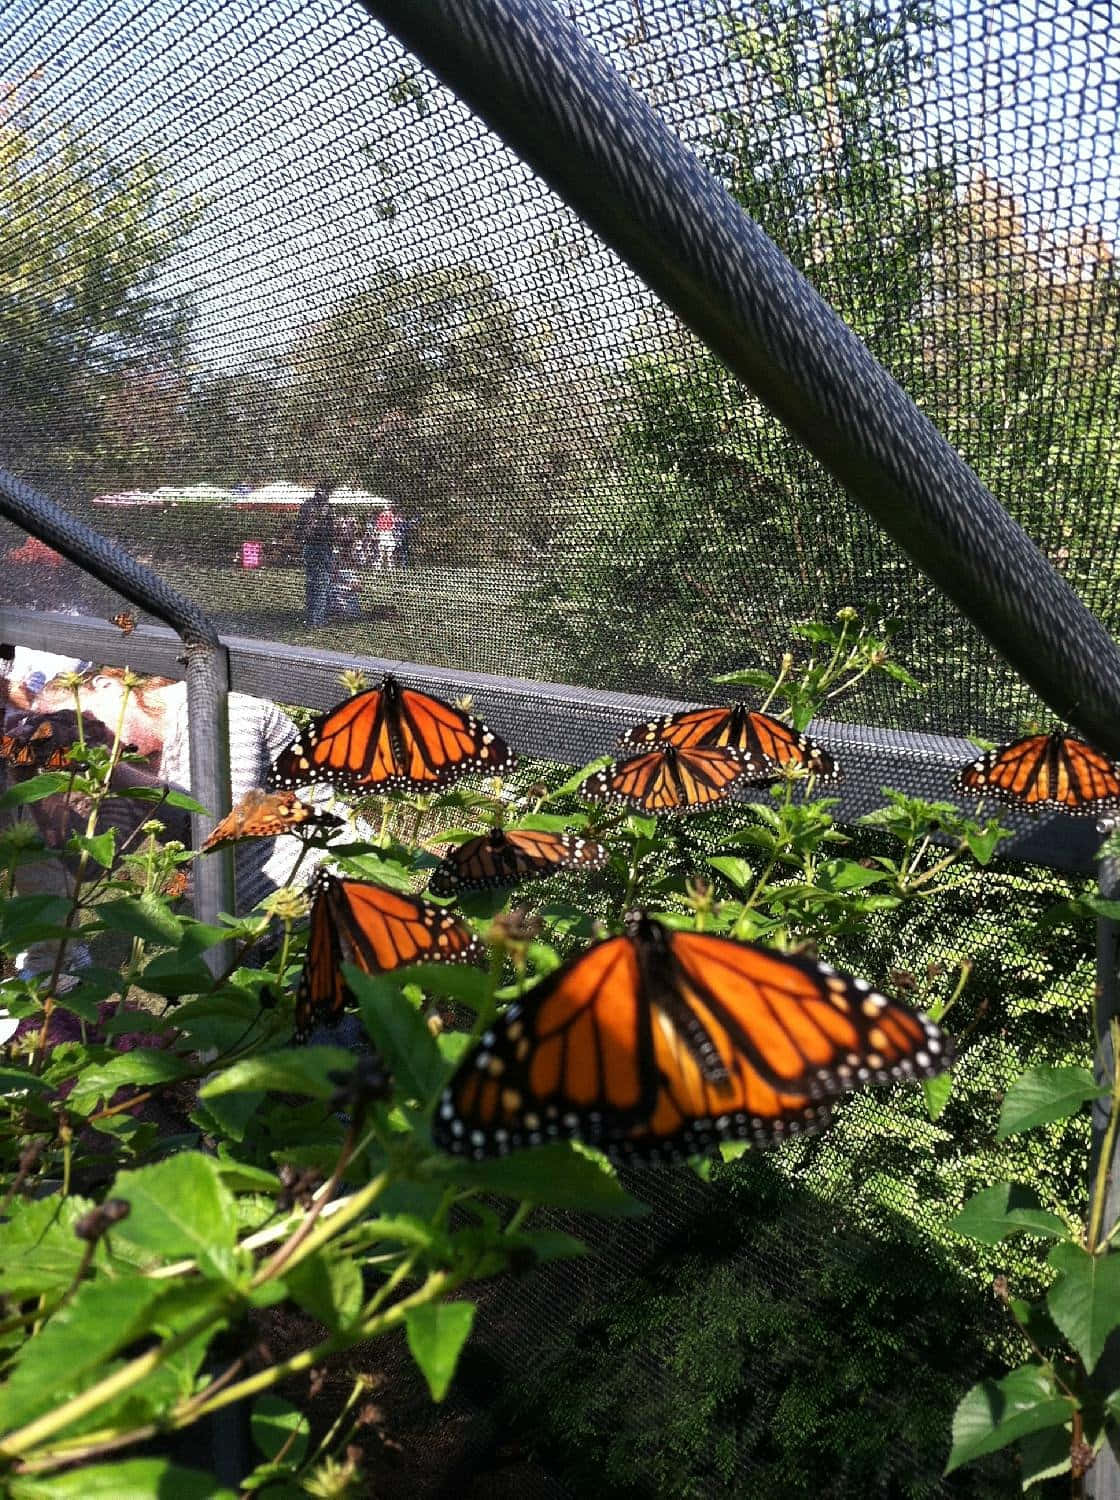 Enjoy the sights and sounds of nature with a visit to Butterfly Park! Wallpaper